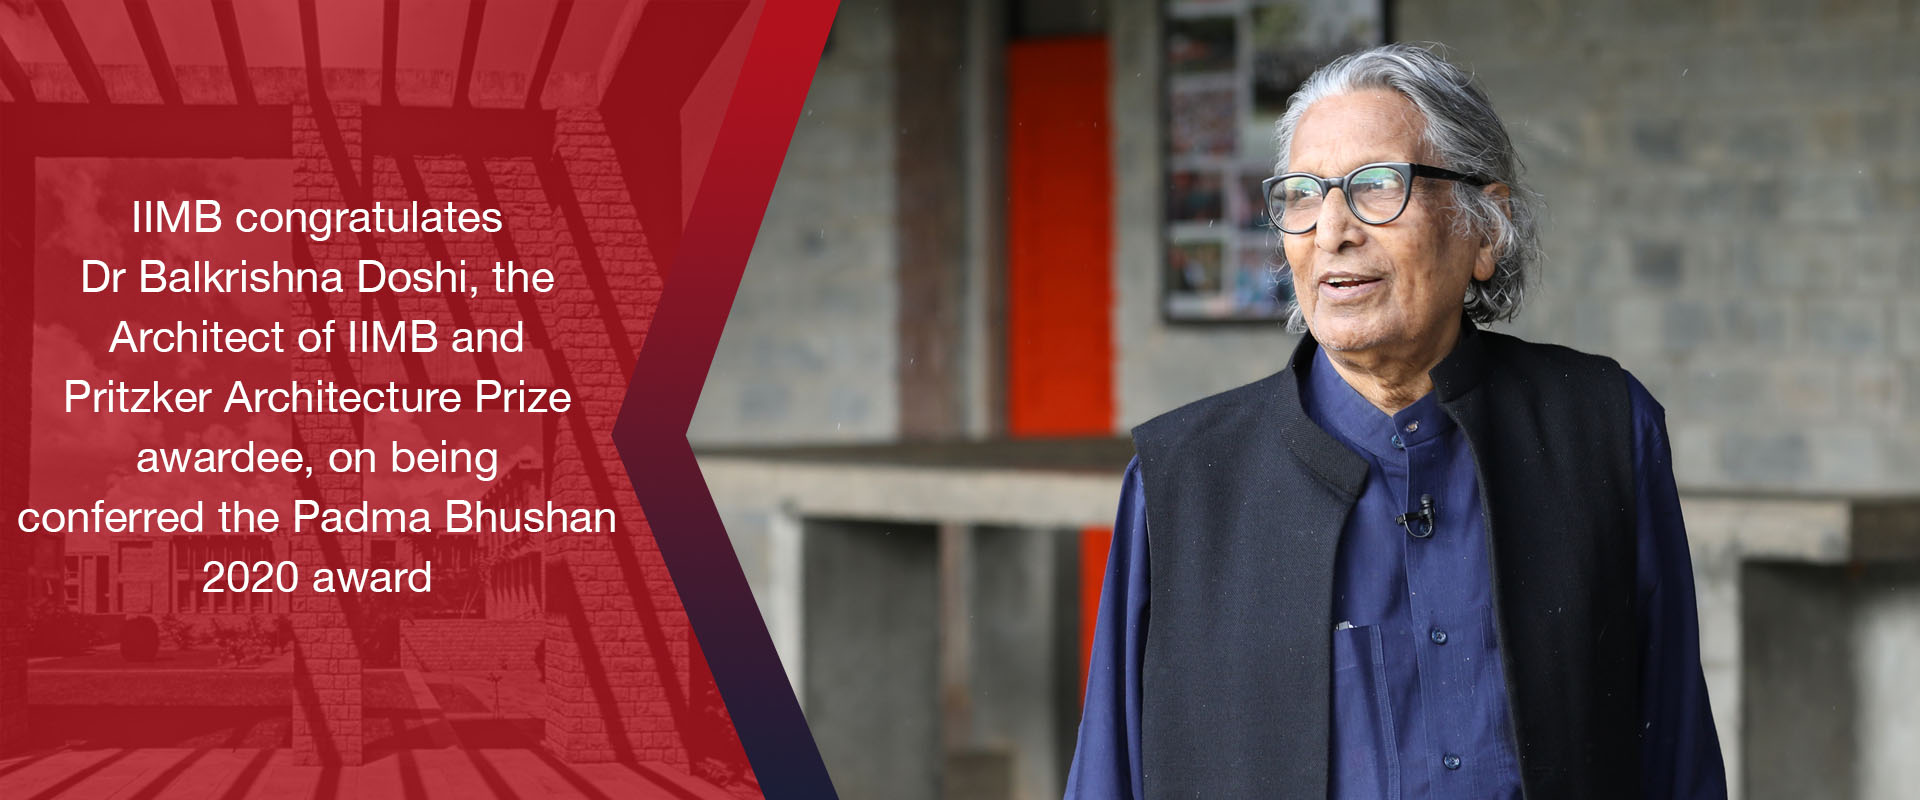 Dr. Balkrishna Doshi, architect of IIMB and Pritzker Architecture Prize awardee, is honoured with Padma Bhushan